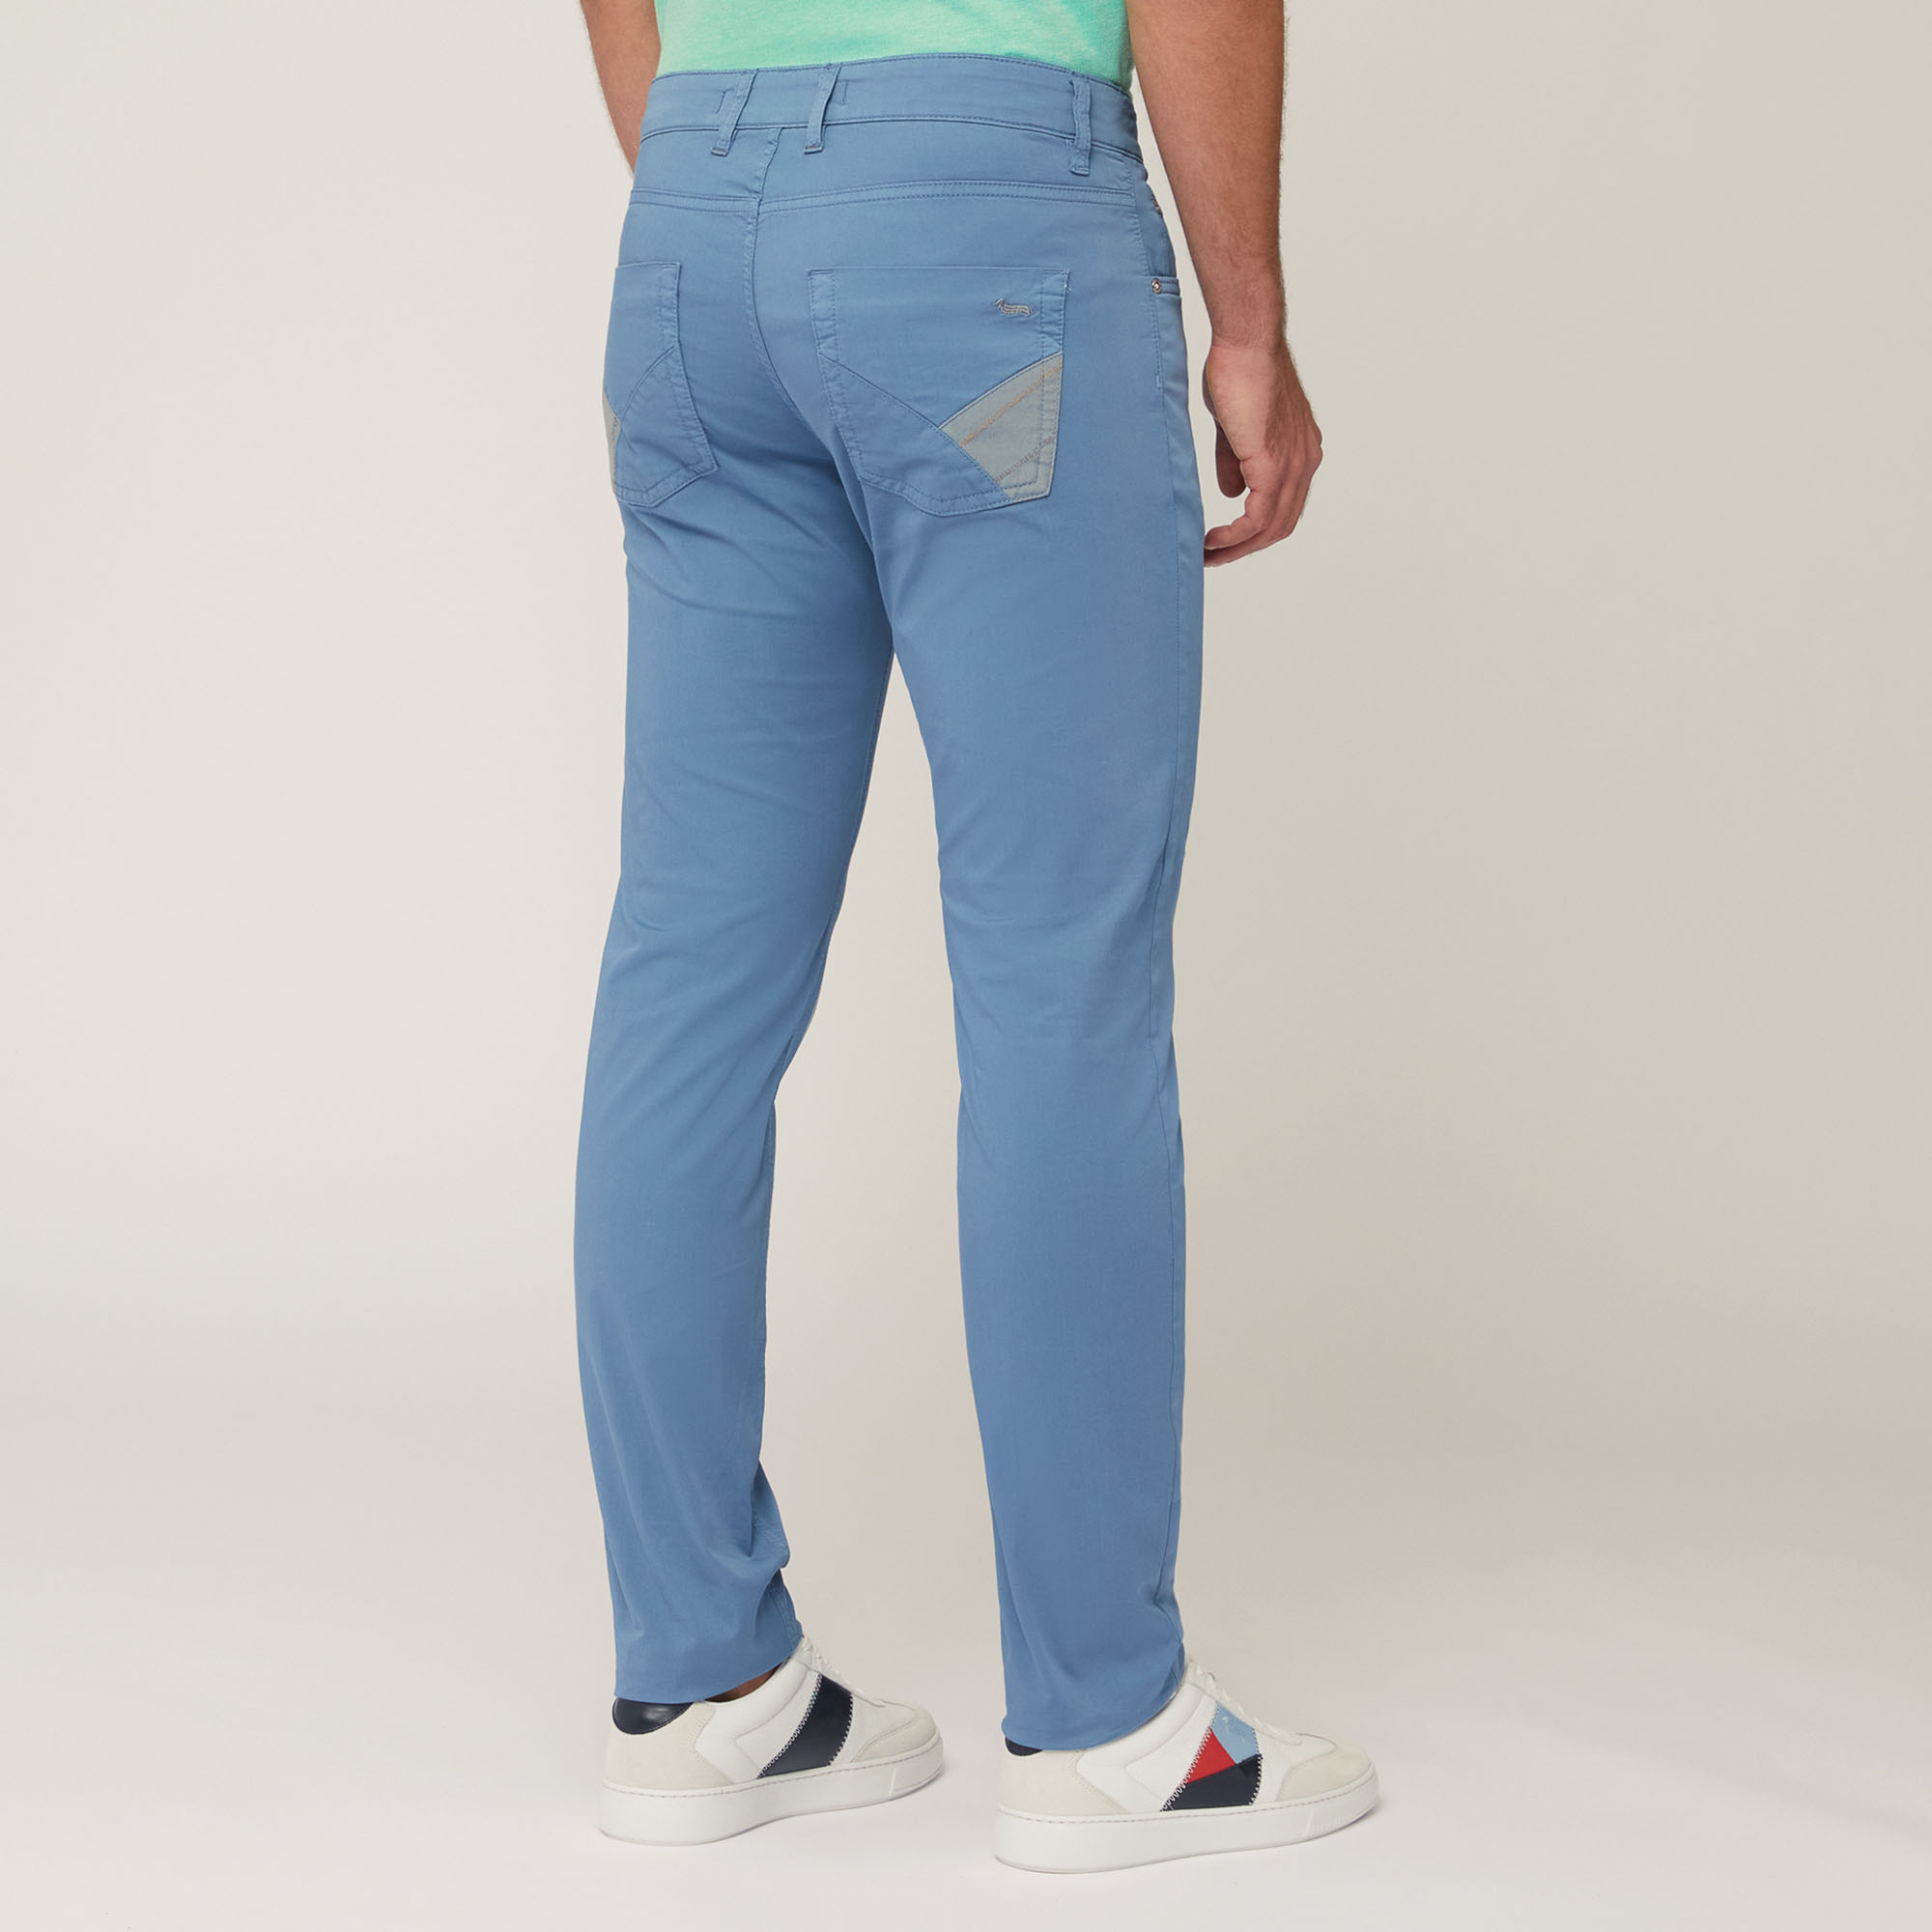 Pants with Inserts